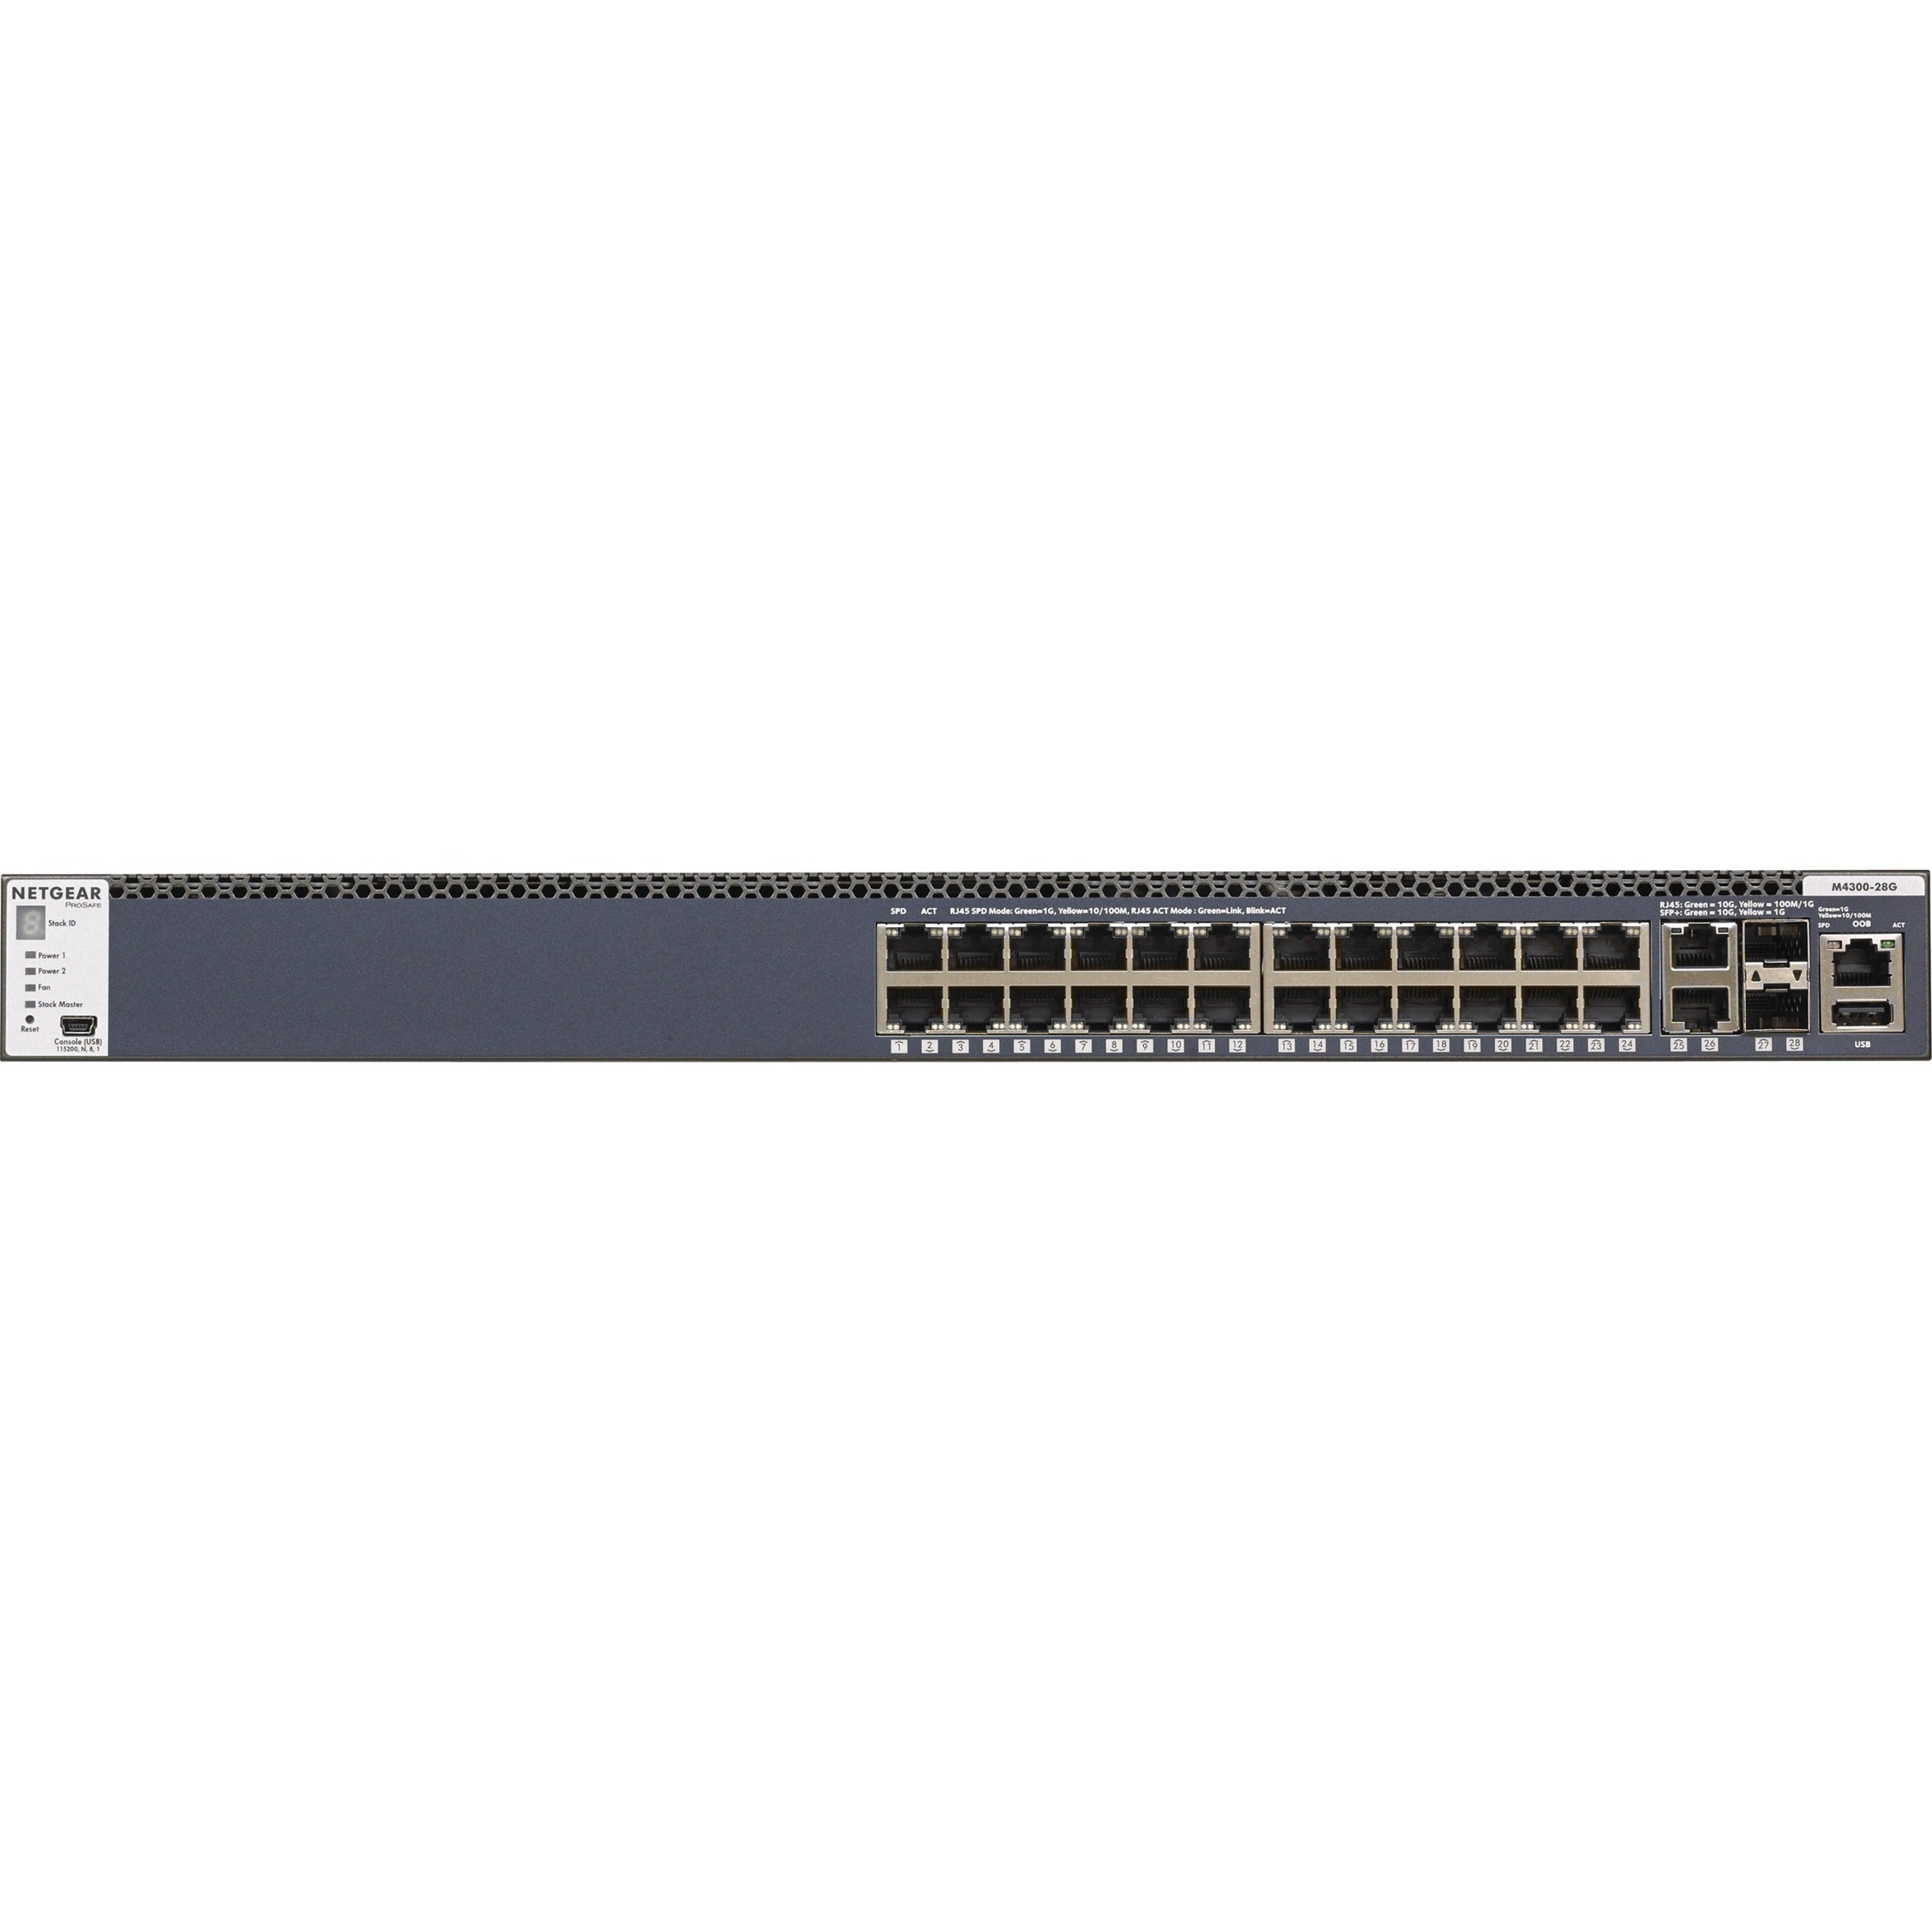 Netgear GSM4328S-100NES M4300-28G ProSafe Managed Switch, 24x1G Stackable, 2x10GBASE-T and 2xSFP+, Layer 3 Switch